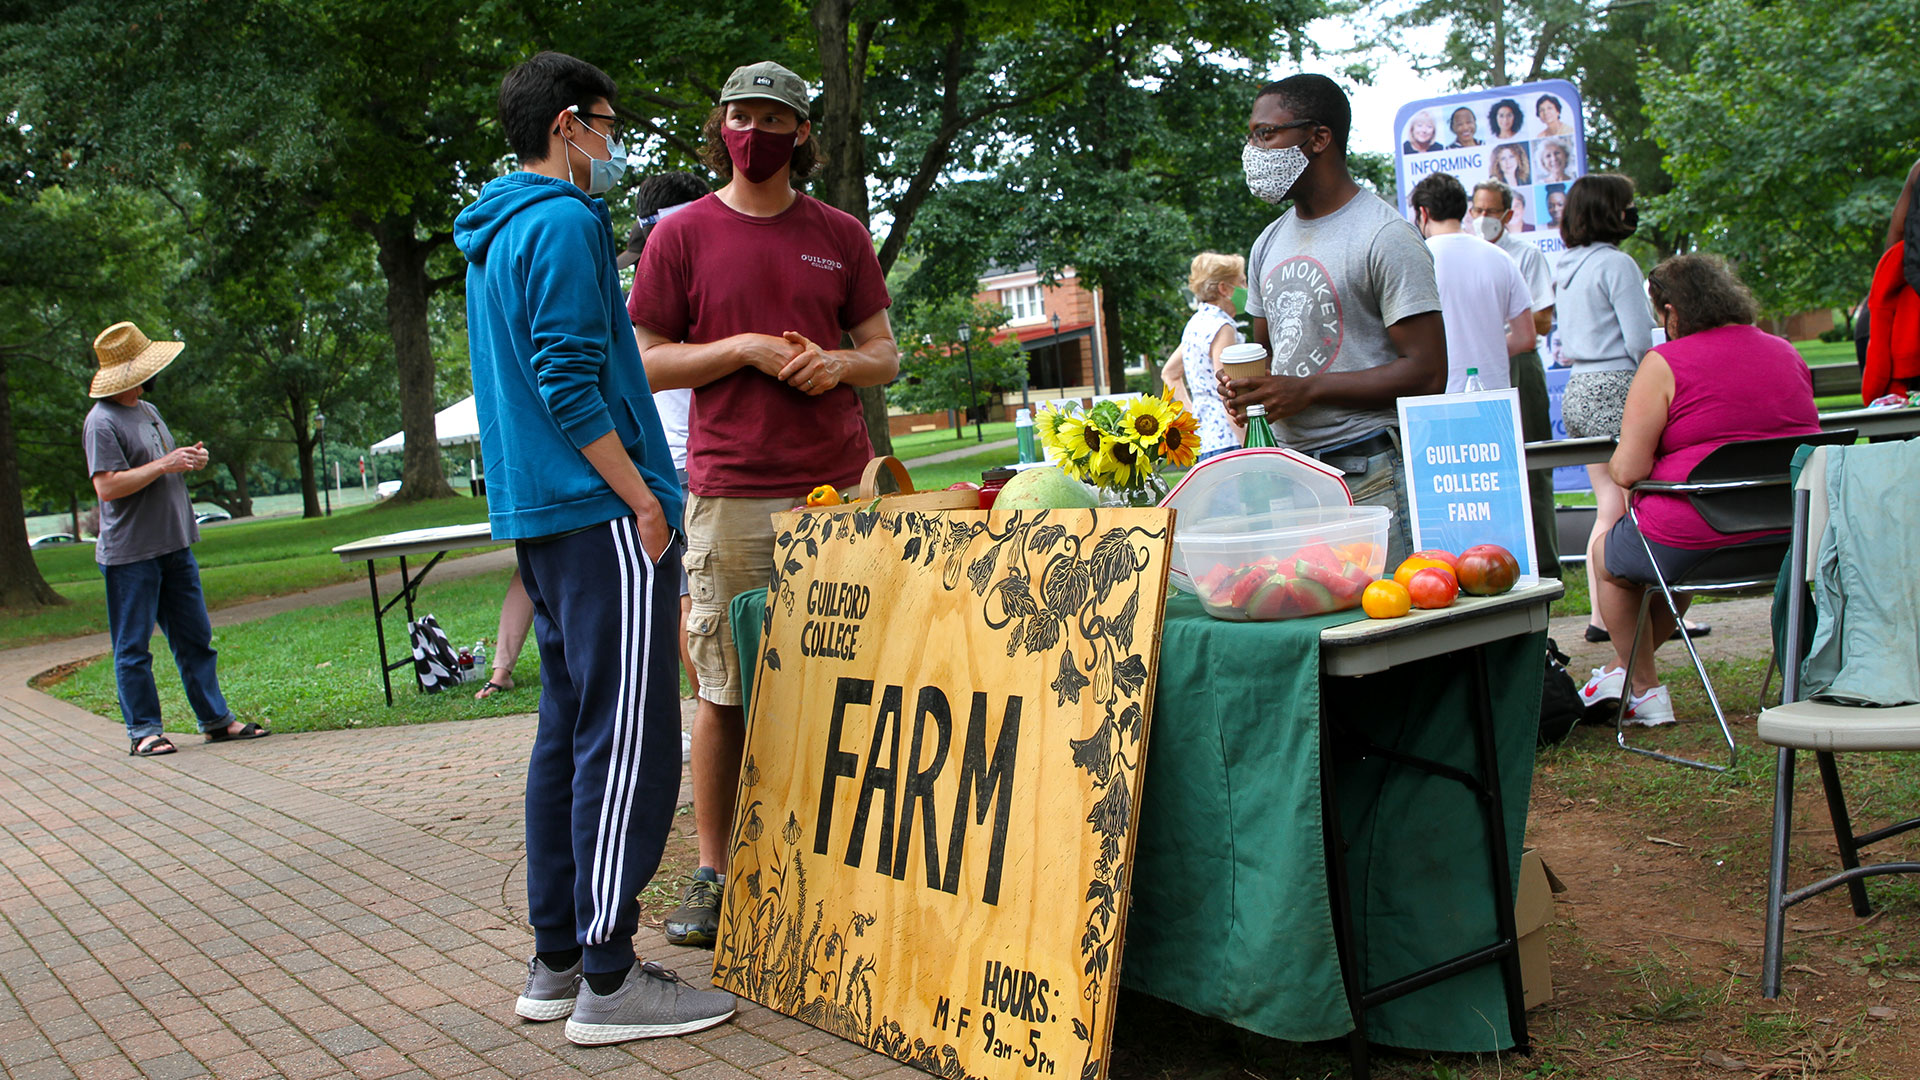 Students stop by the College Farm table to talk with the campus farmer.